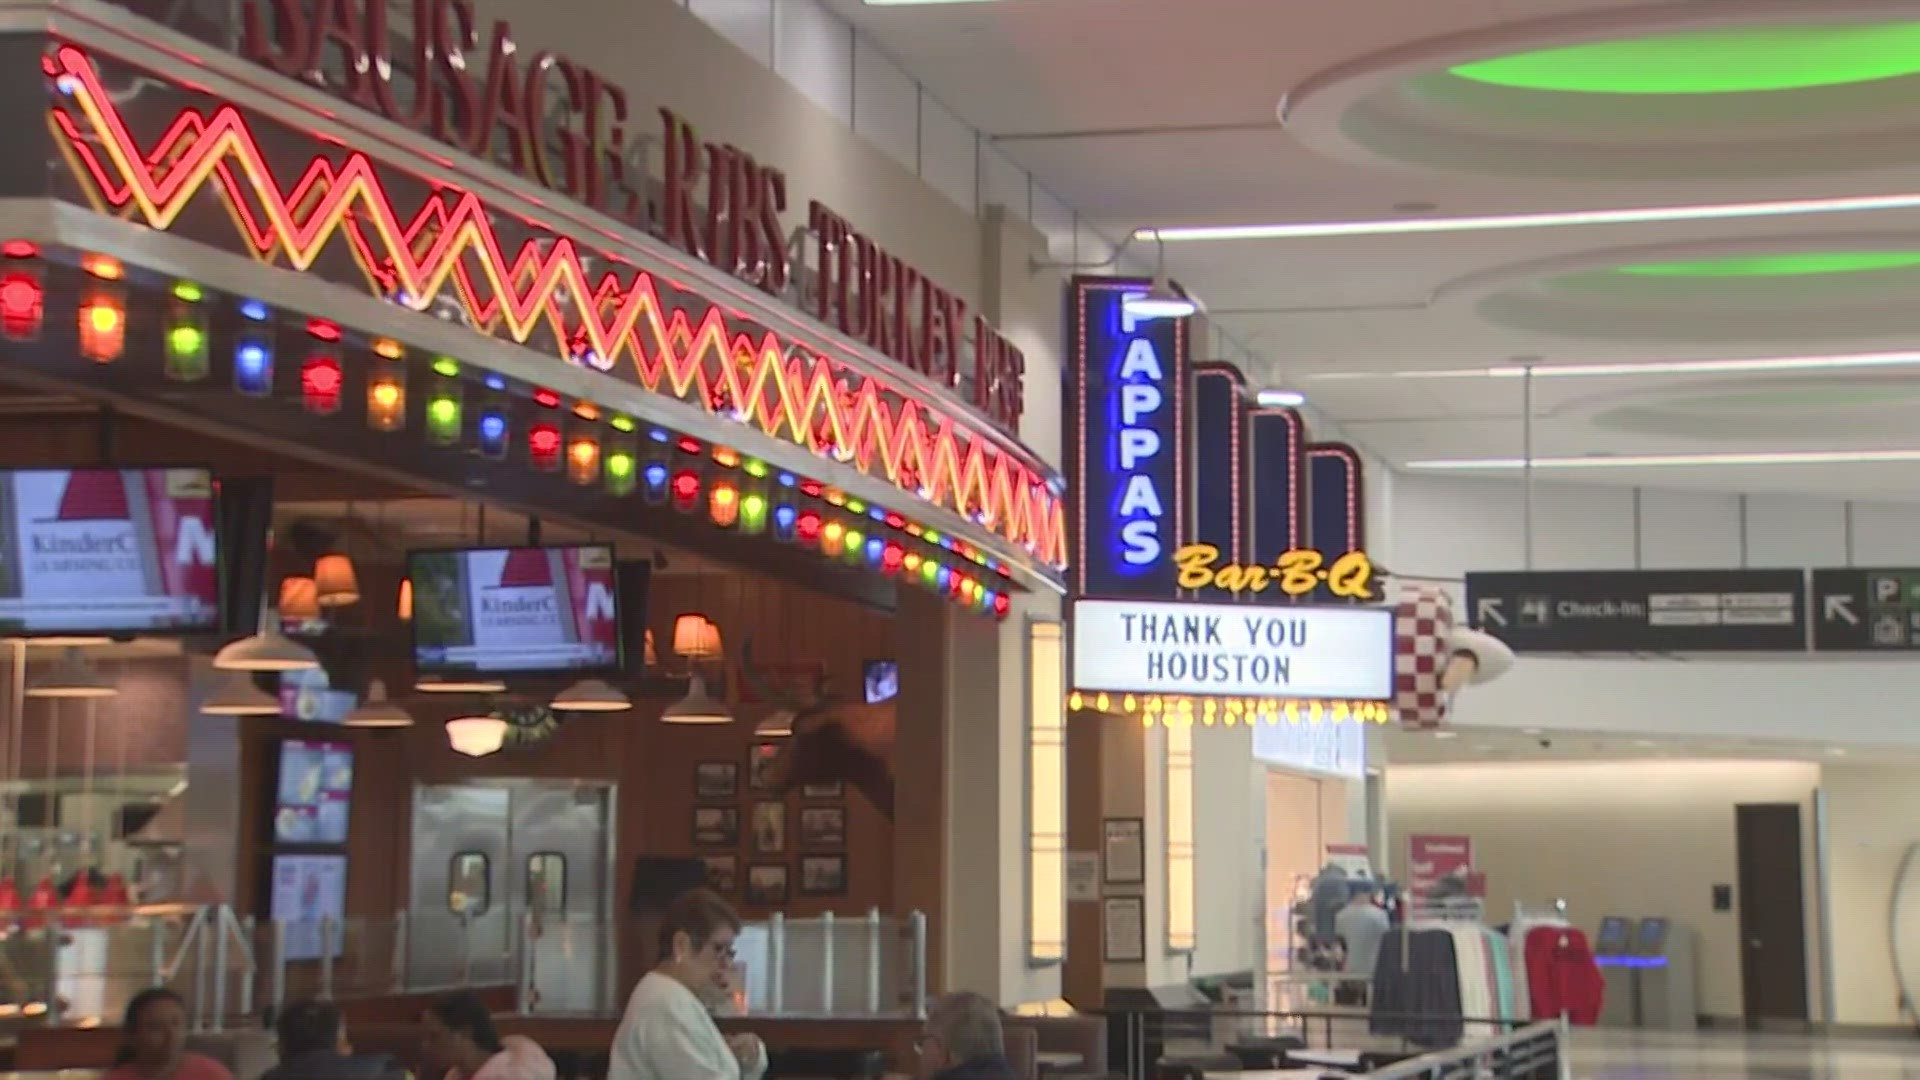 The Houston City Council voted 10-6 to replace Pappas restaurants at Hobby Airport despite a public campaign by their campaign to stay Wednesday morning.